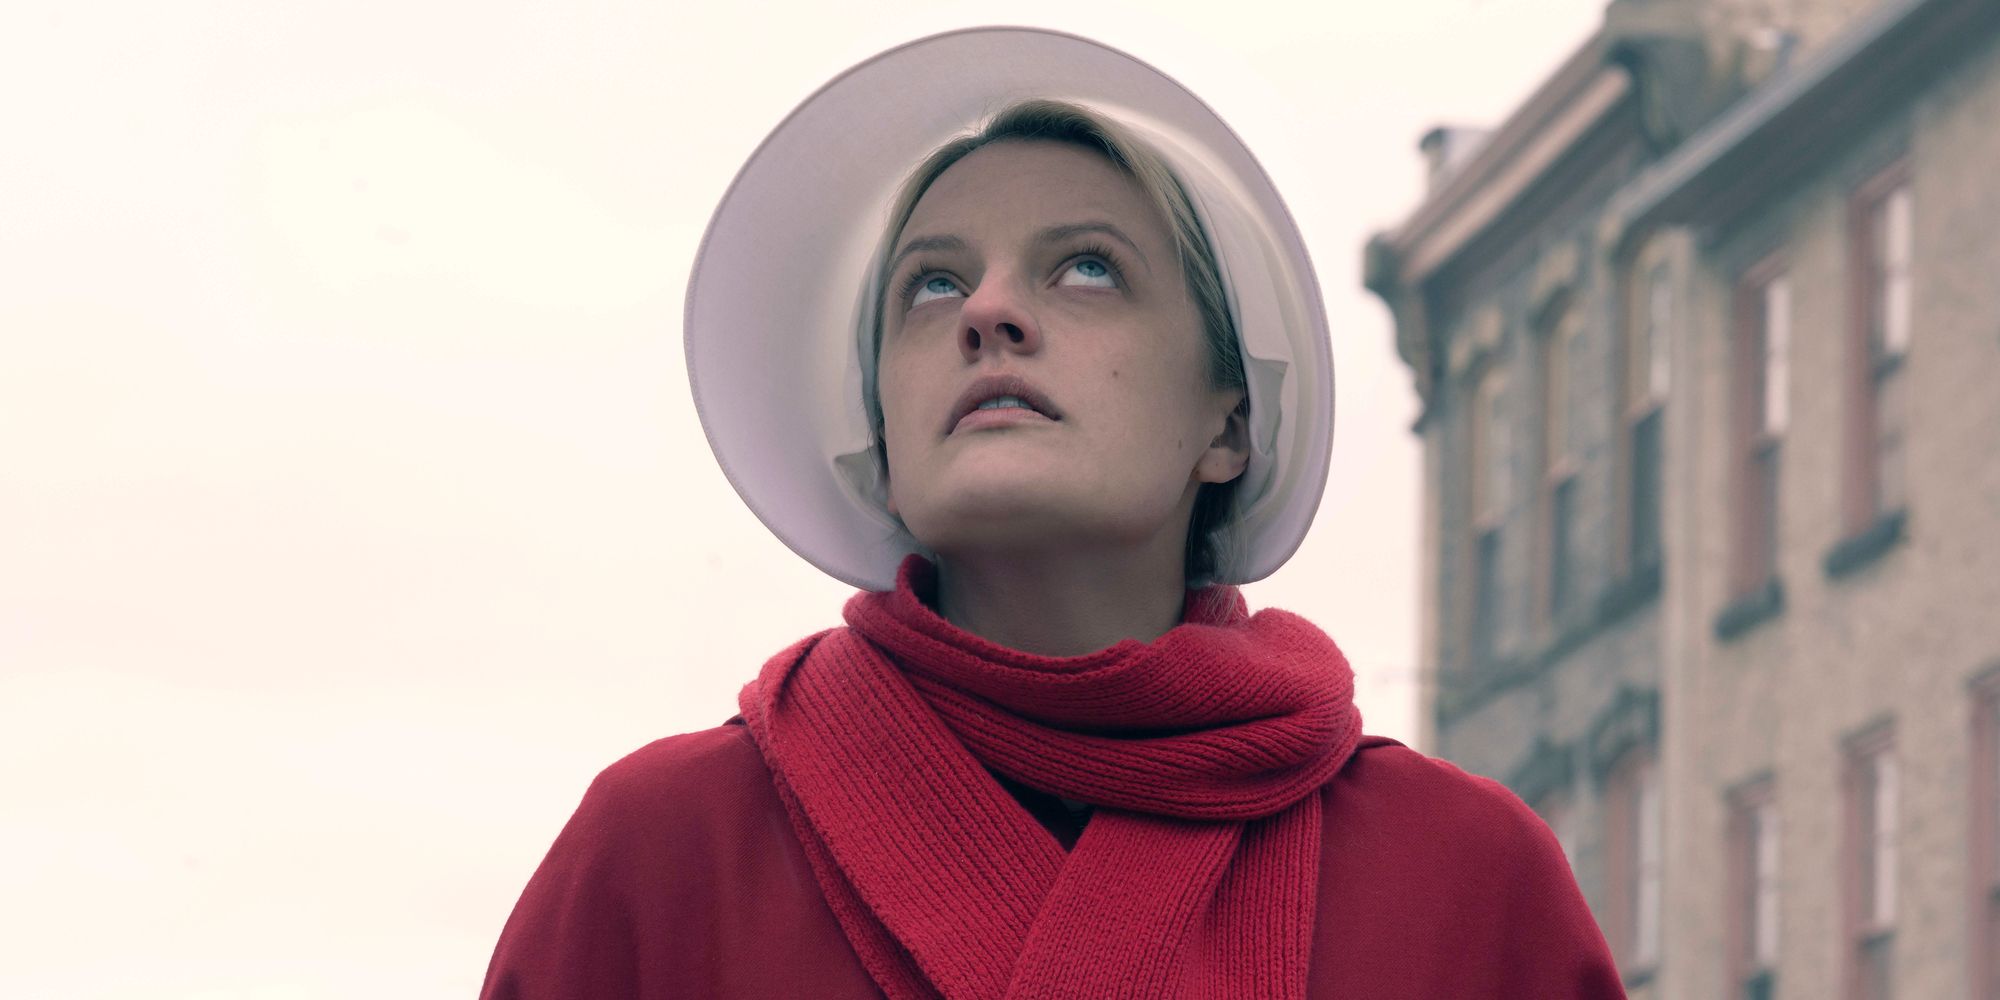 Offred stares at her former friend's apartment in The Handmaid's Tale Season 3 Hulu